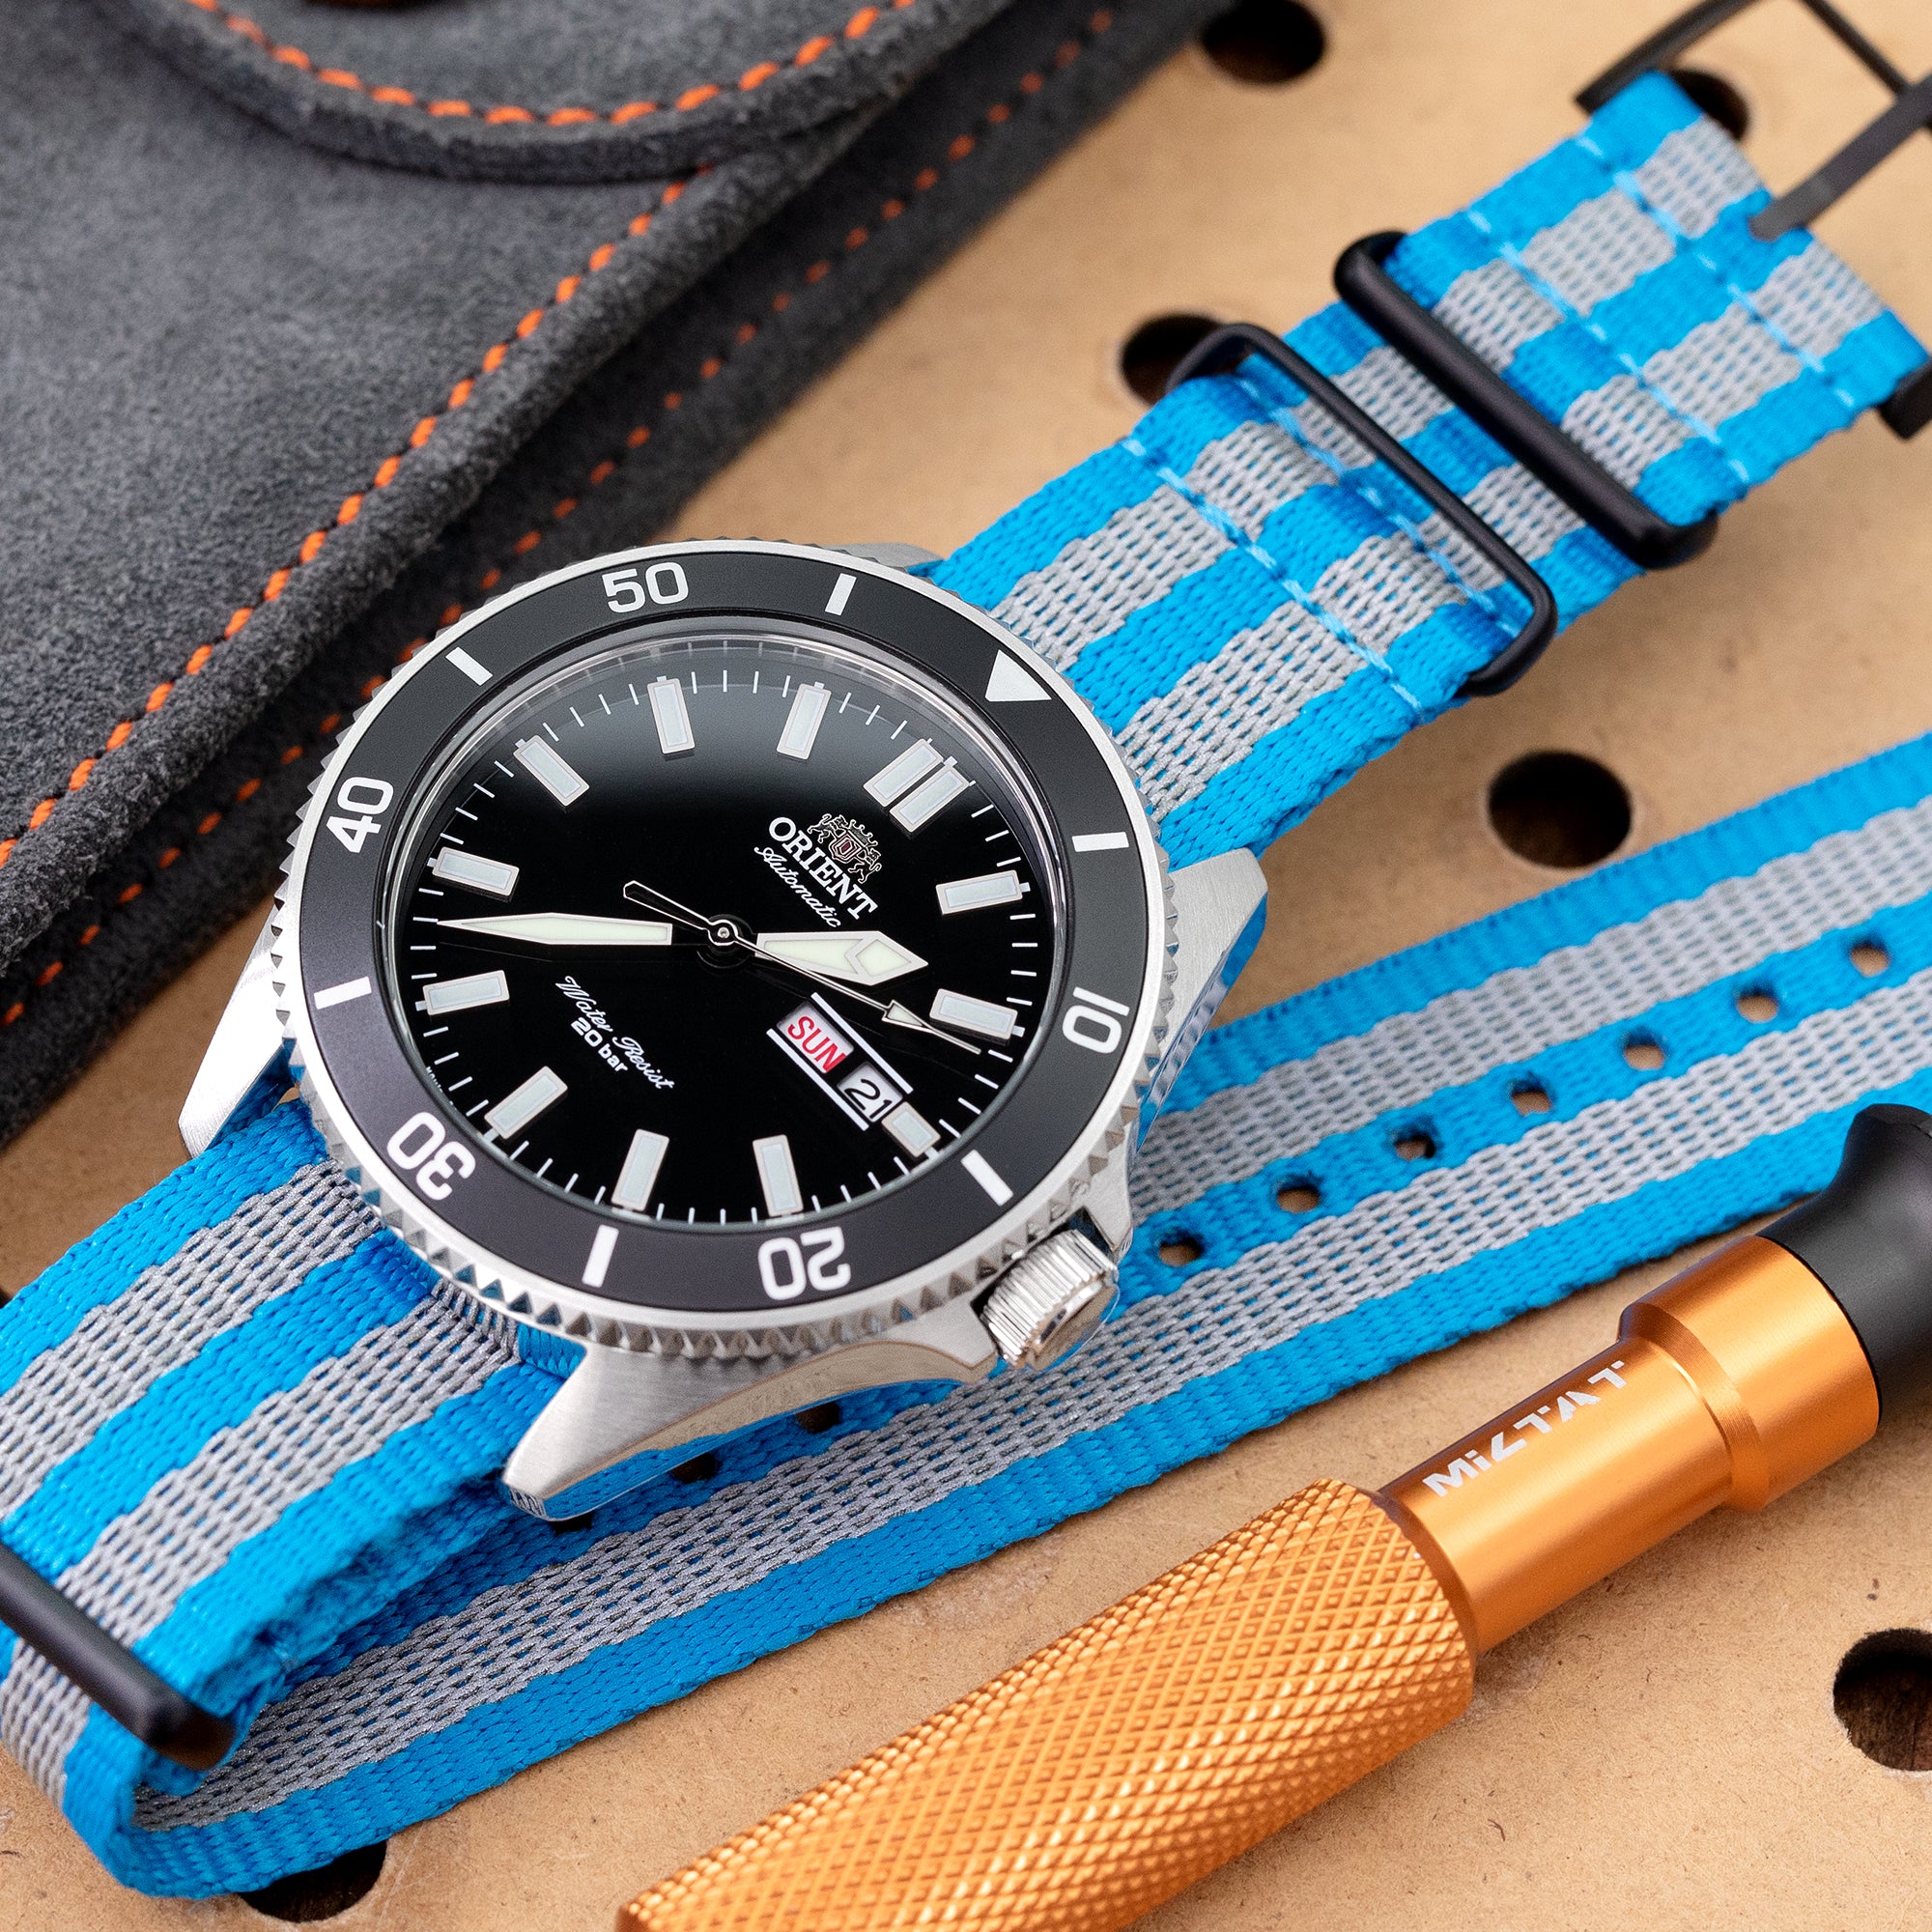 MiLTAT 22mm G10 NATO 3M Glow-in-the-Dark Watch Strap, PVD Black - Blue and Grey Stripes